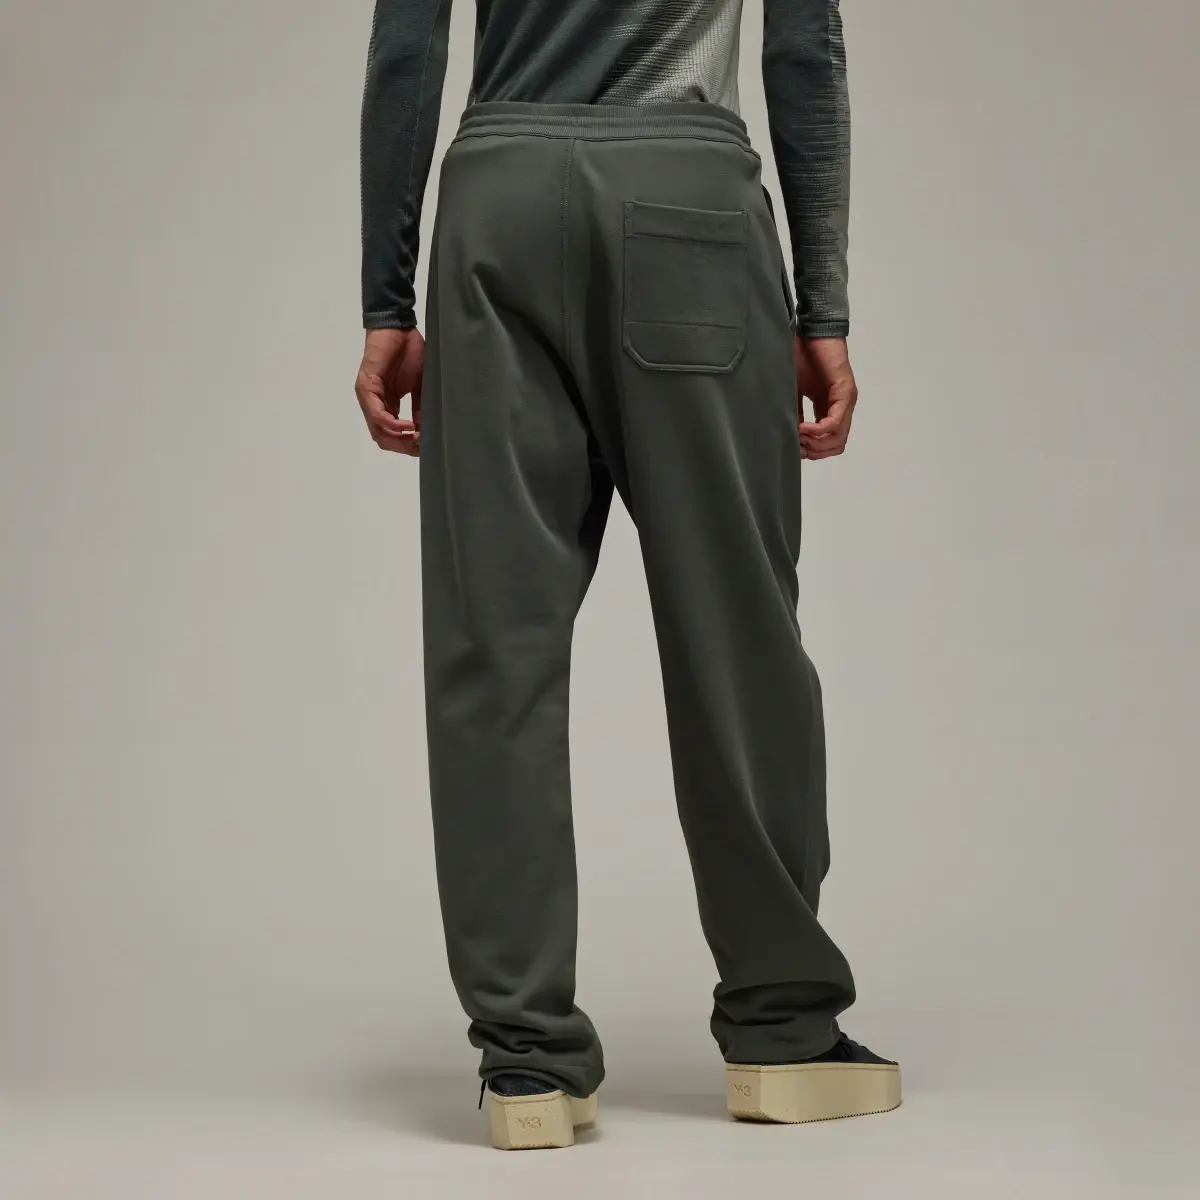 Adidas Y-3 Organic Cotton Terry Straight Joggers. 3